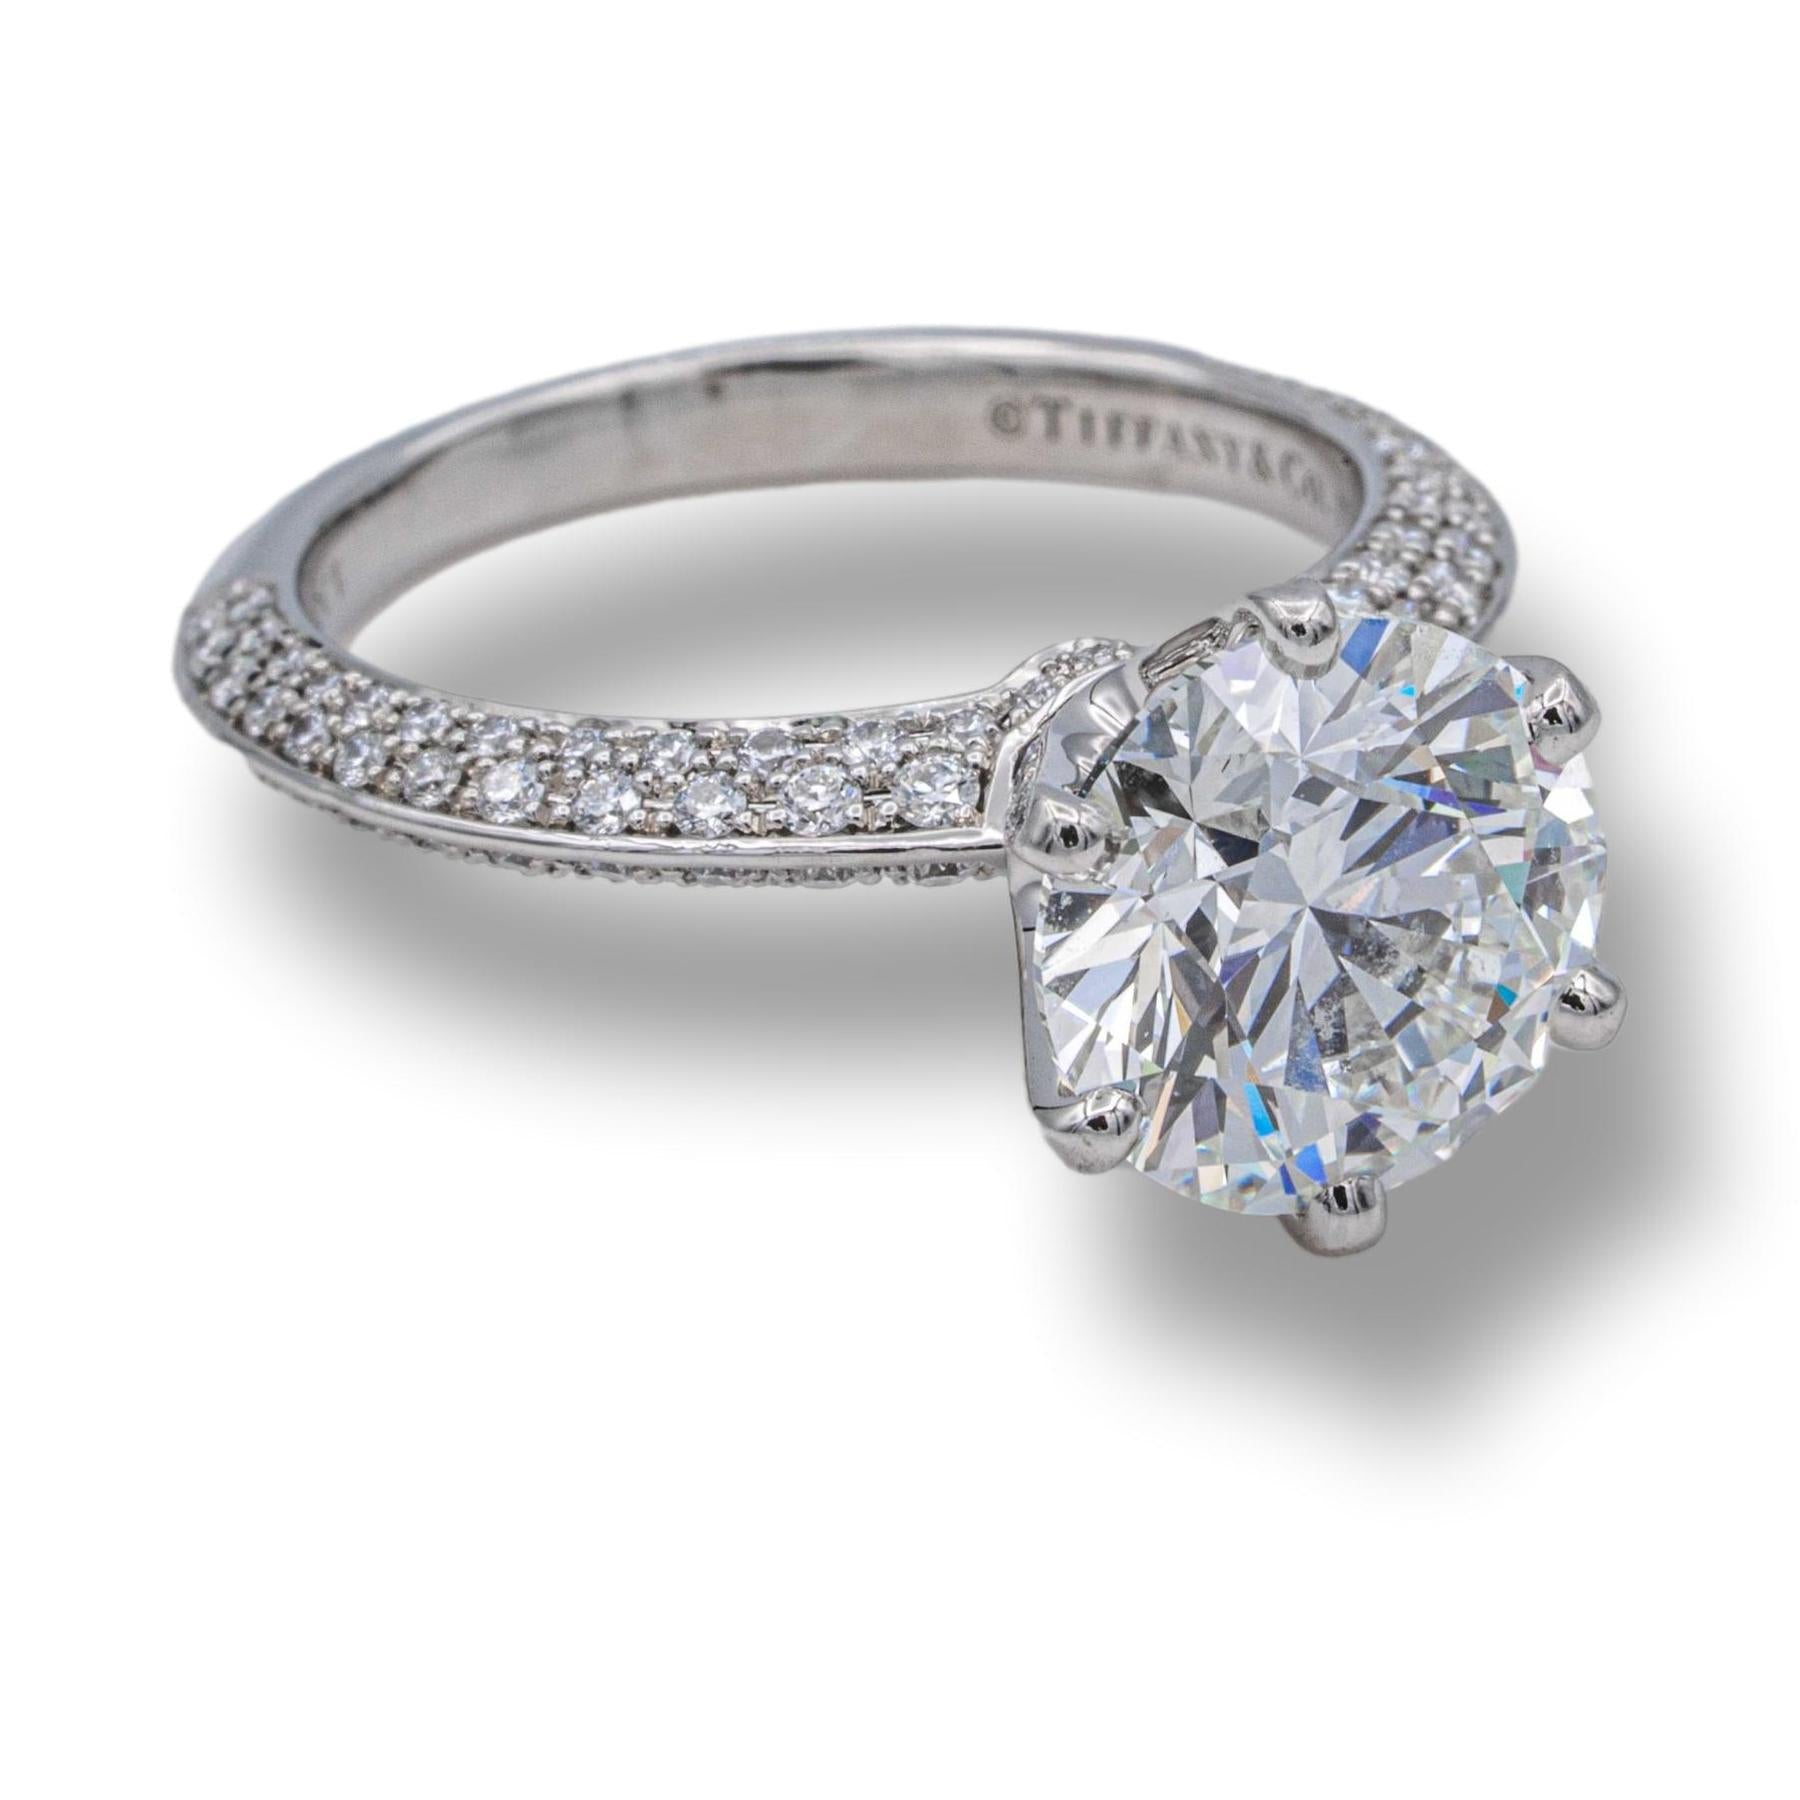 Tiffany & Co. Engagement Rings, Pre-Owned / Used Classic Rings Price, Tiffany's  Diamond and Gold Rings for Women, Page 2